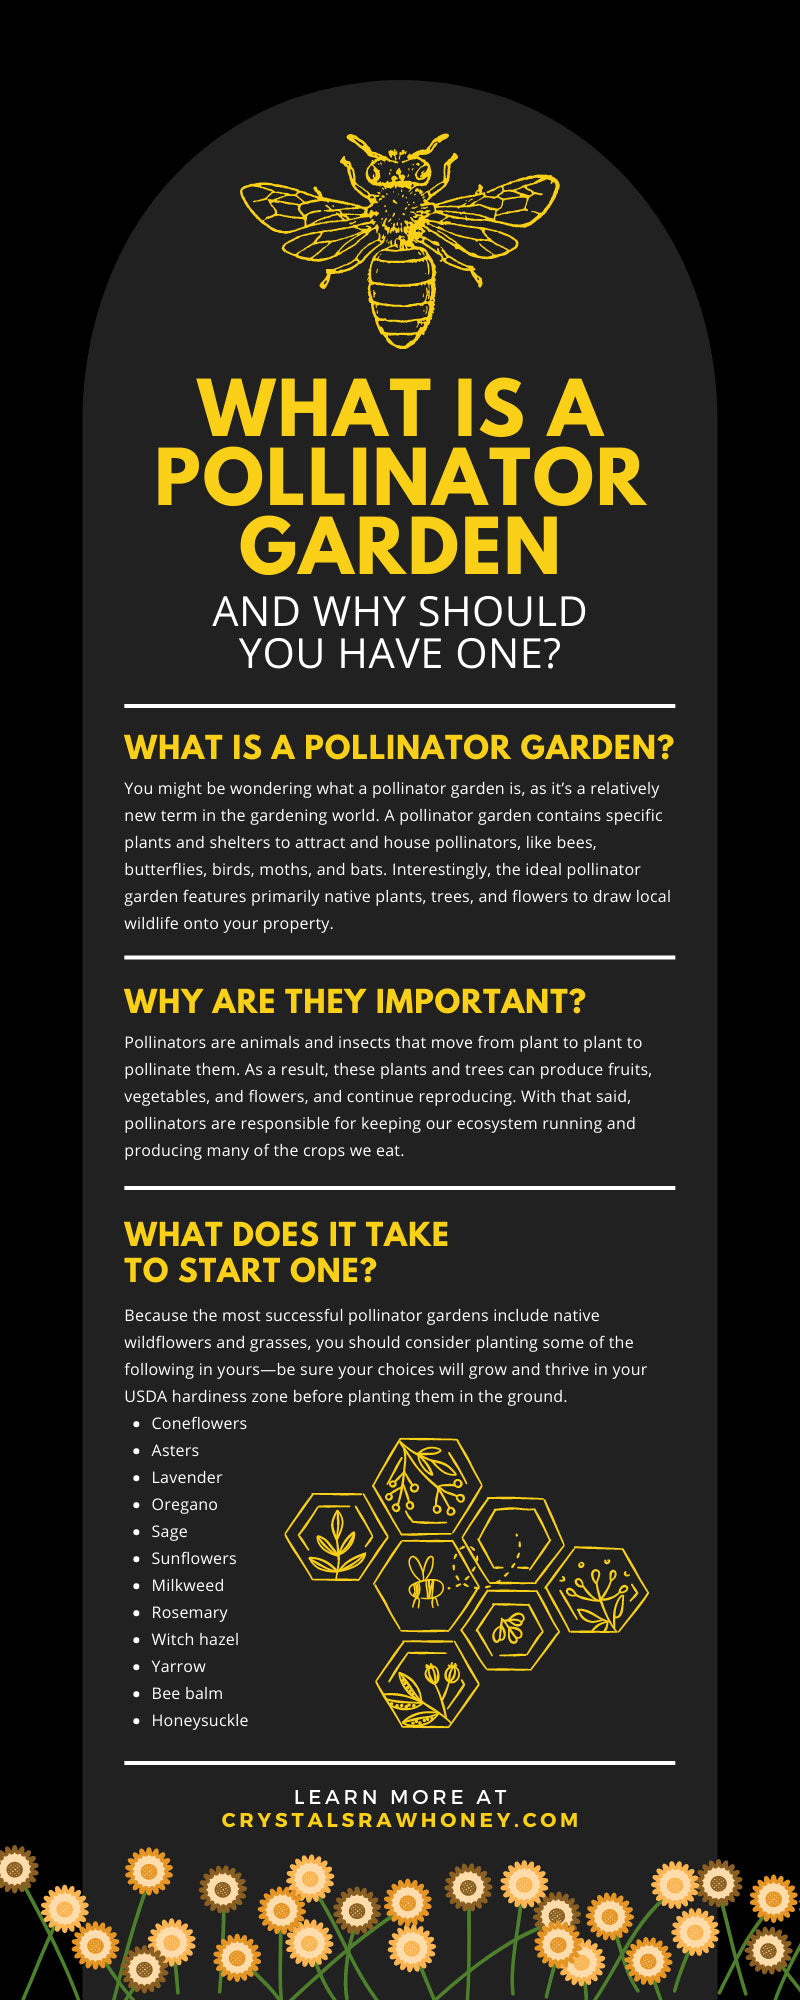 What Is a Pollinator Garden and Why Should You Have One?